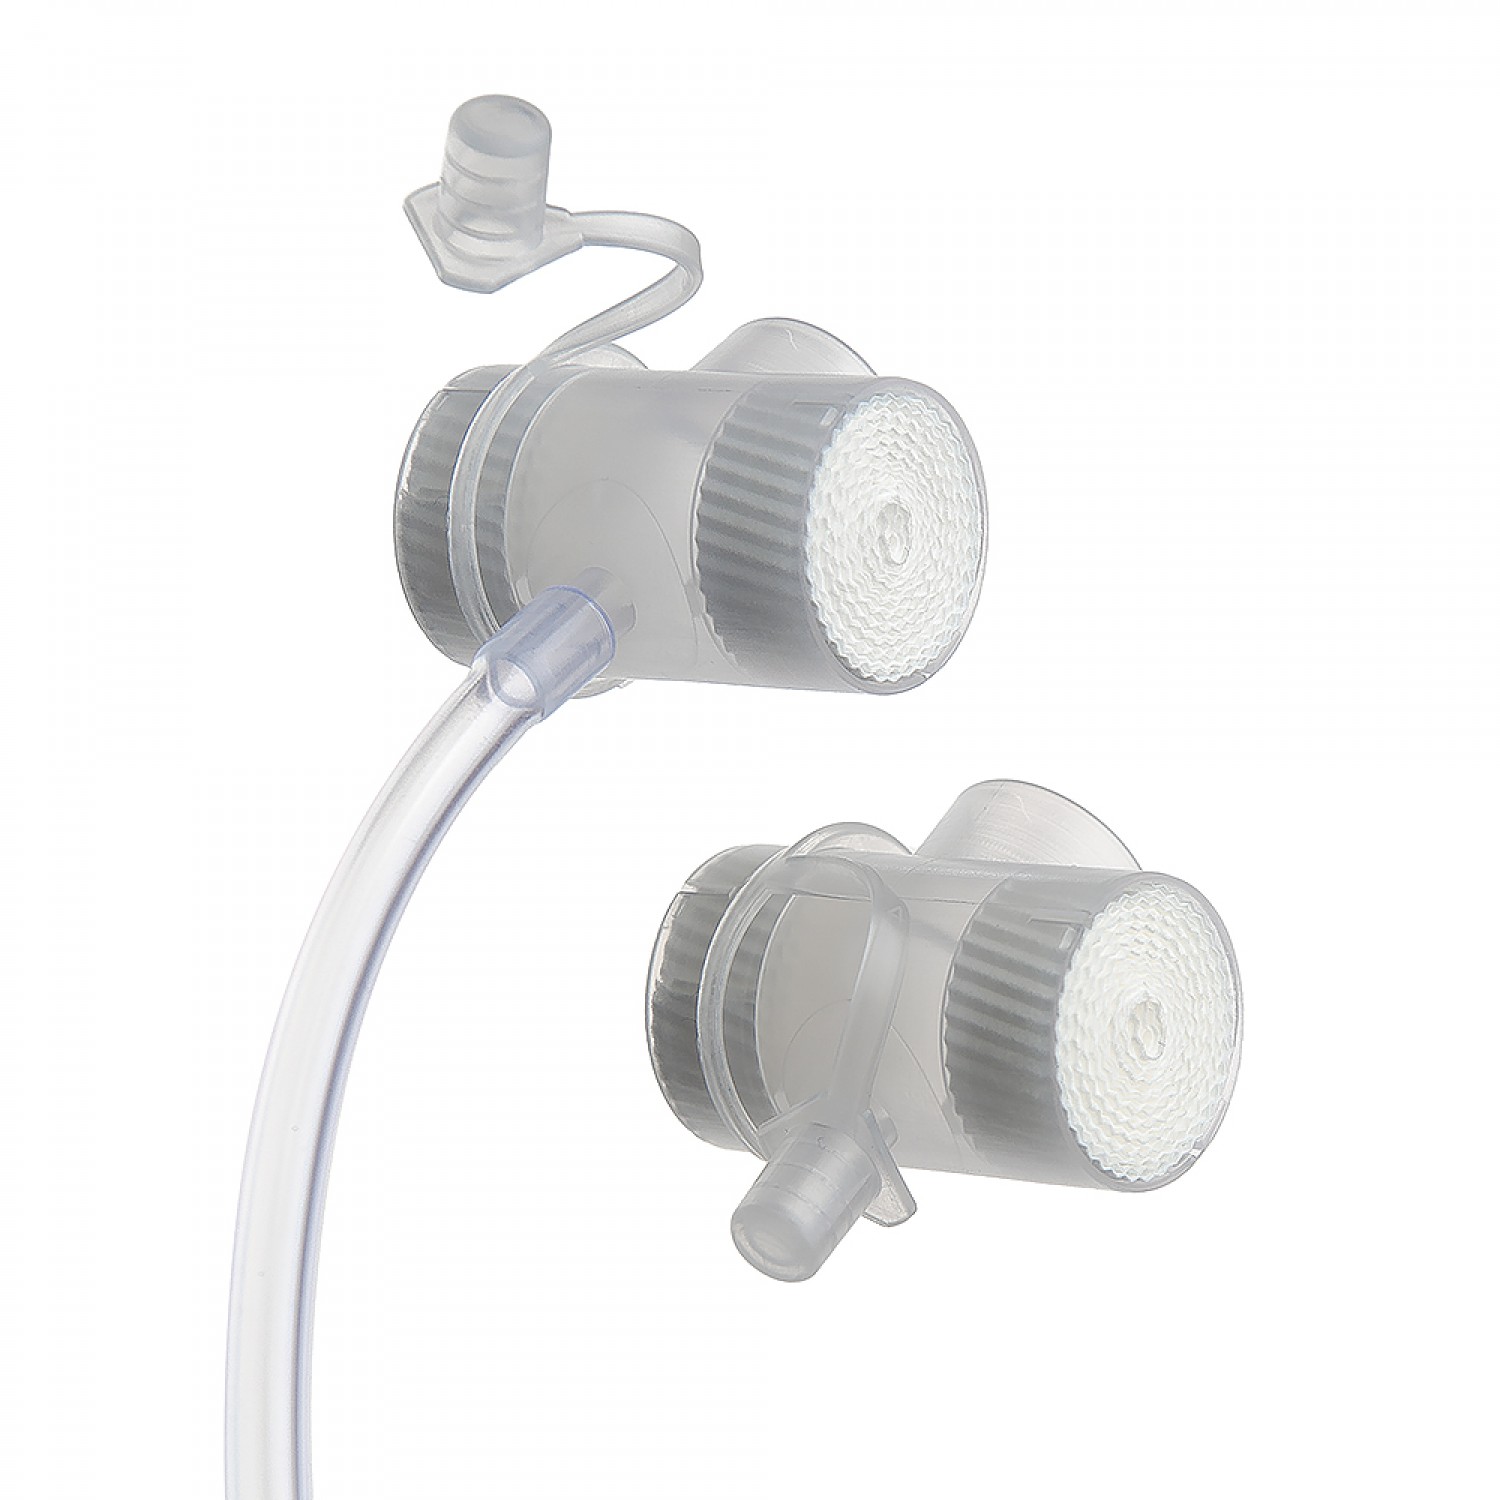 Respiratory tracheostomy filter with heat and moisture exchanger 2